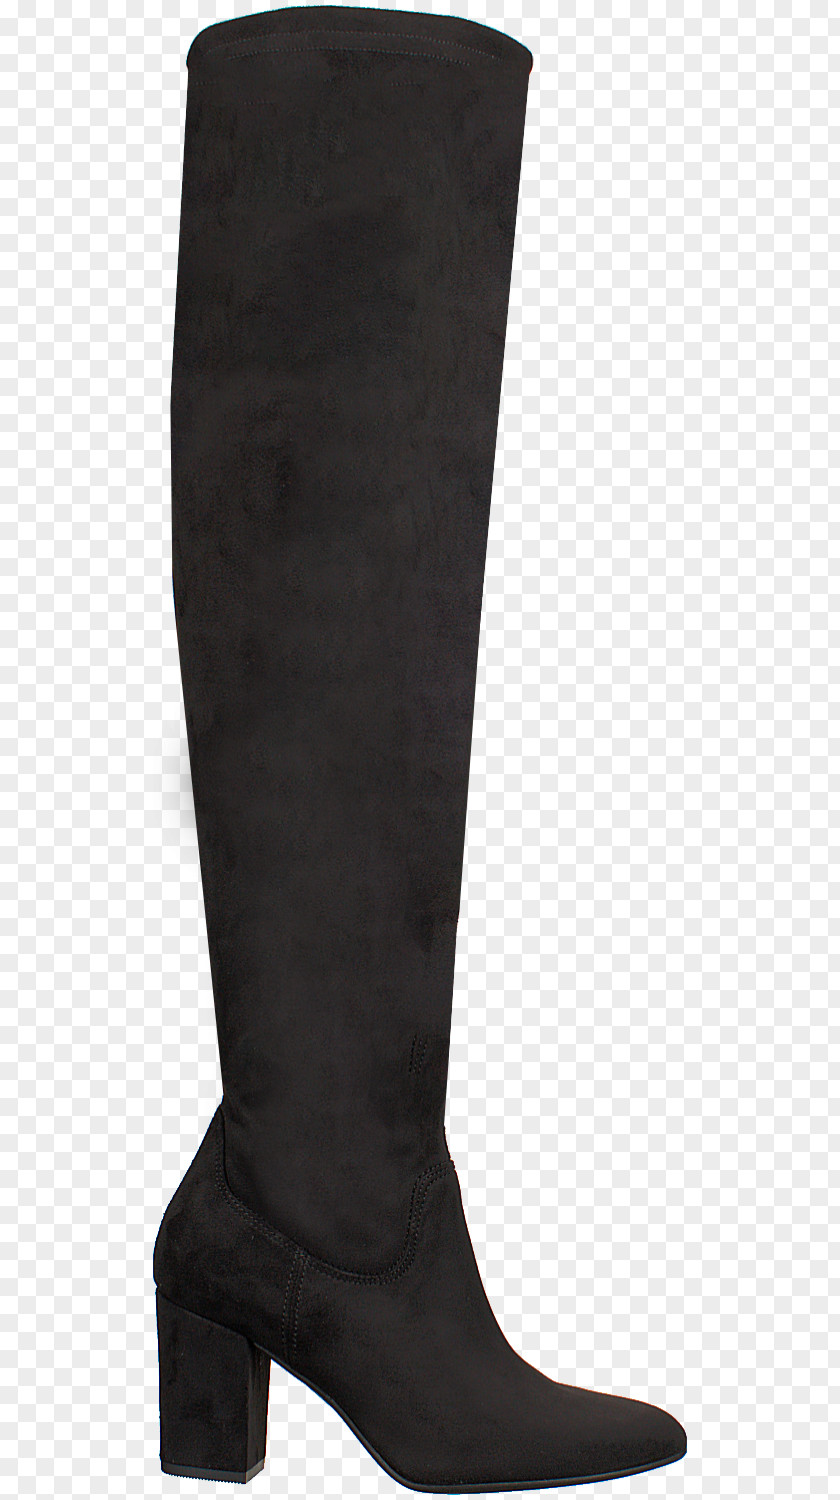 Knee High Boots Chelsea Boot Shoe Zipper Leather PNG